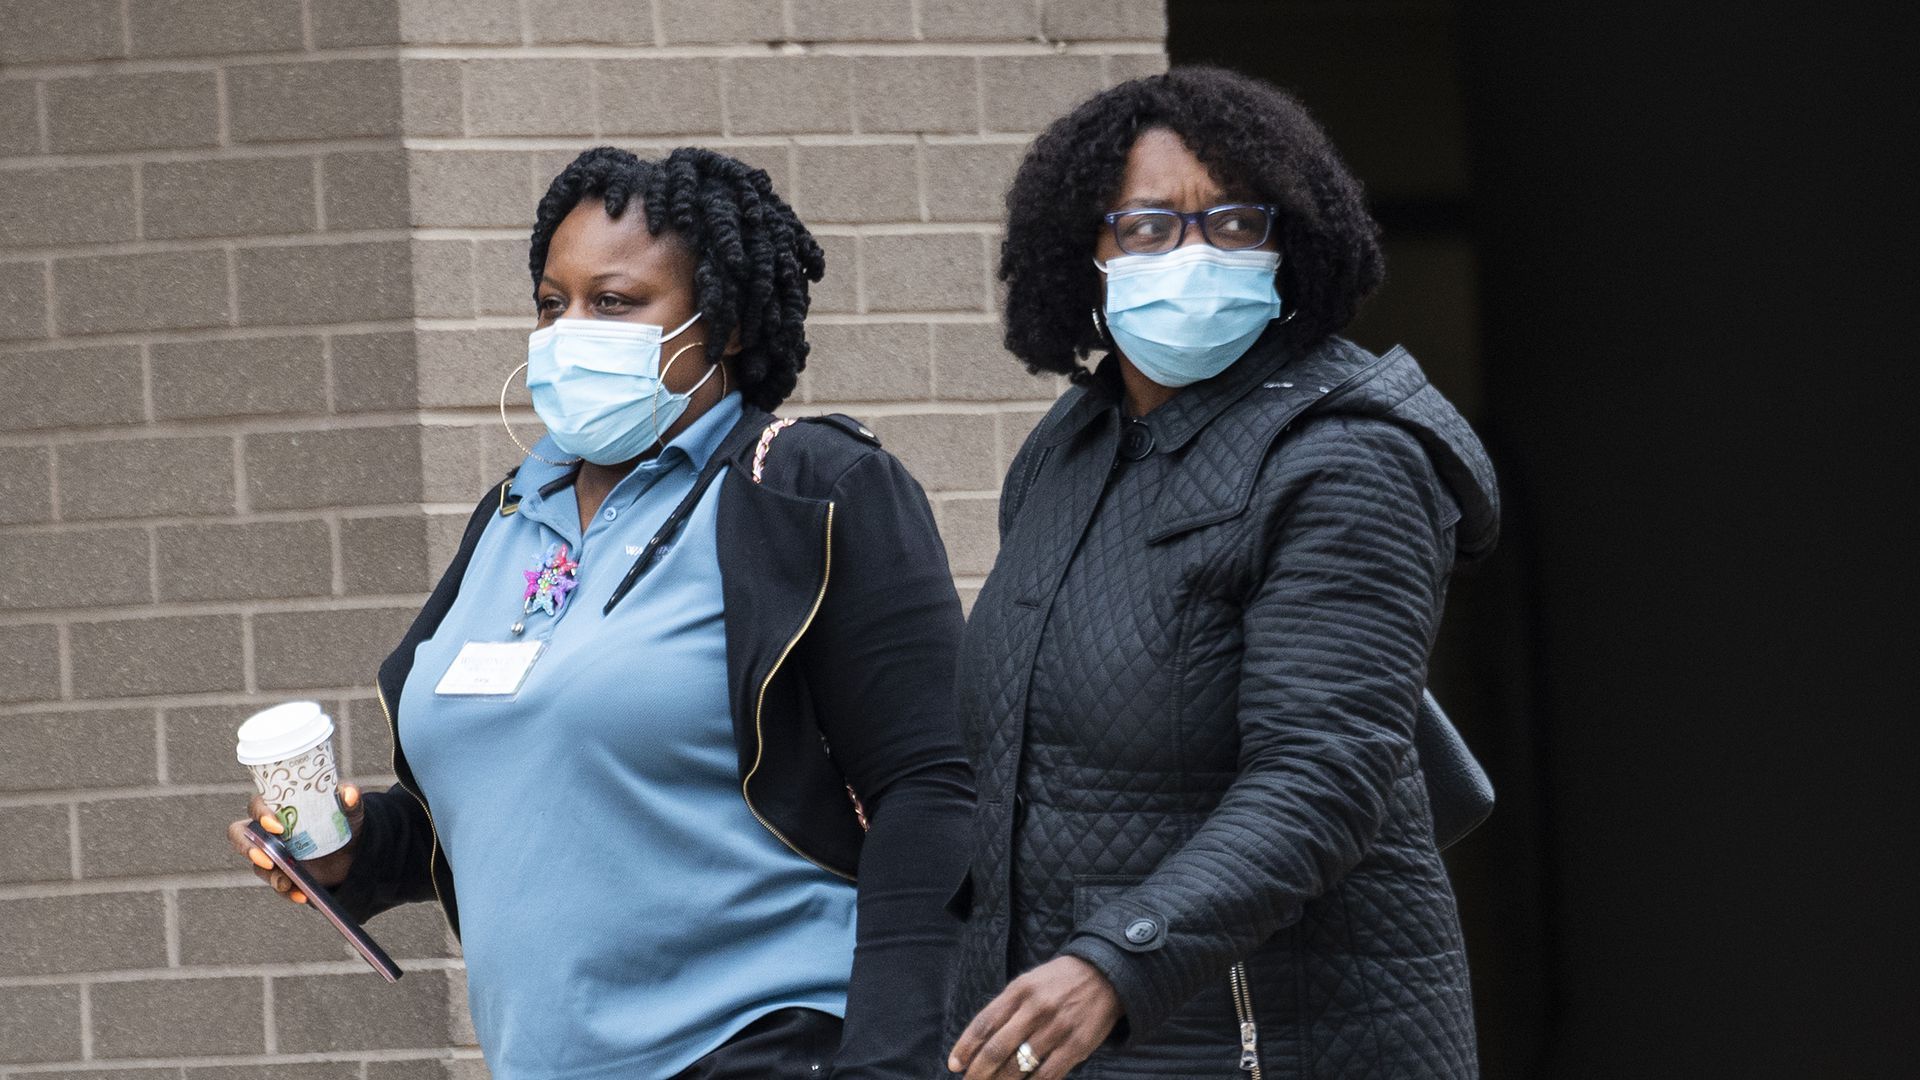 Medical workers wear masks as they walk back to GW hospital in D.C.